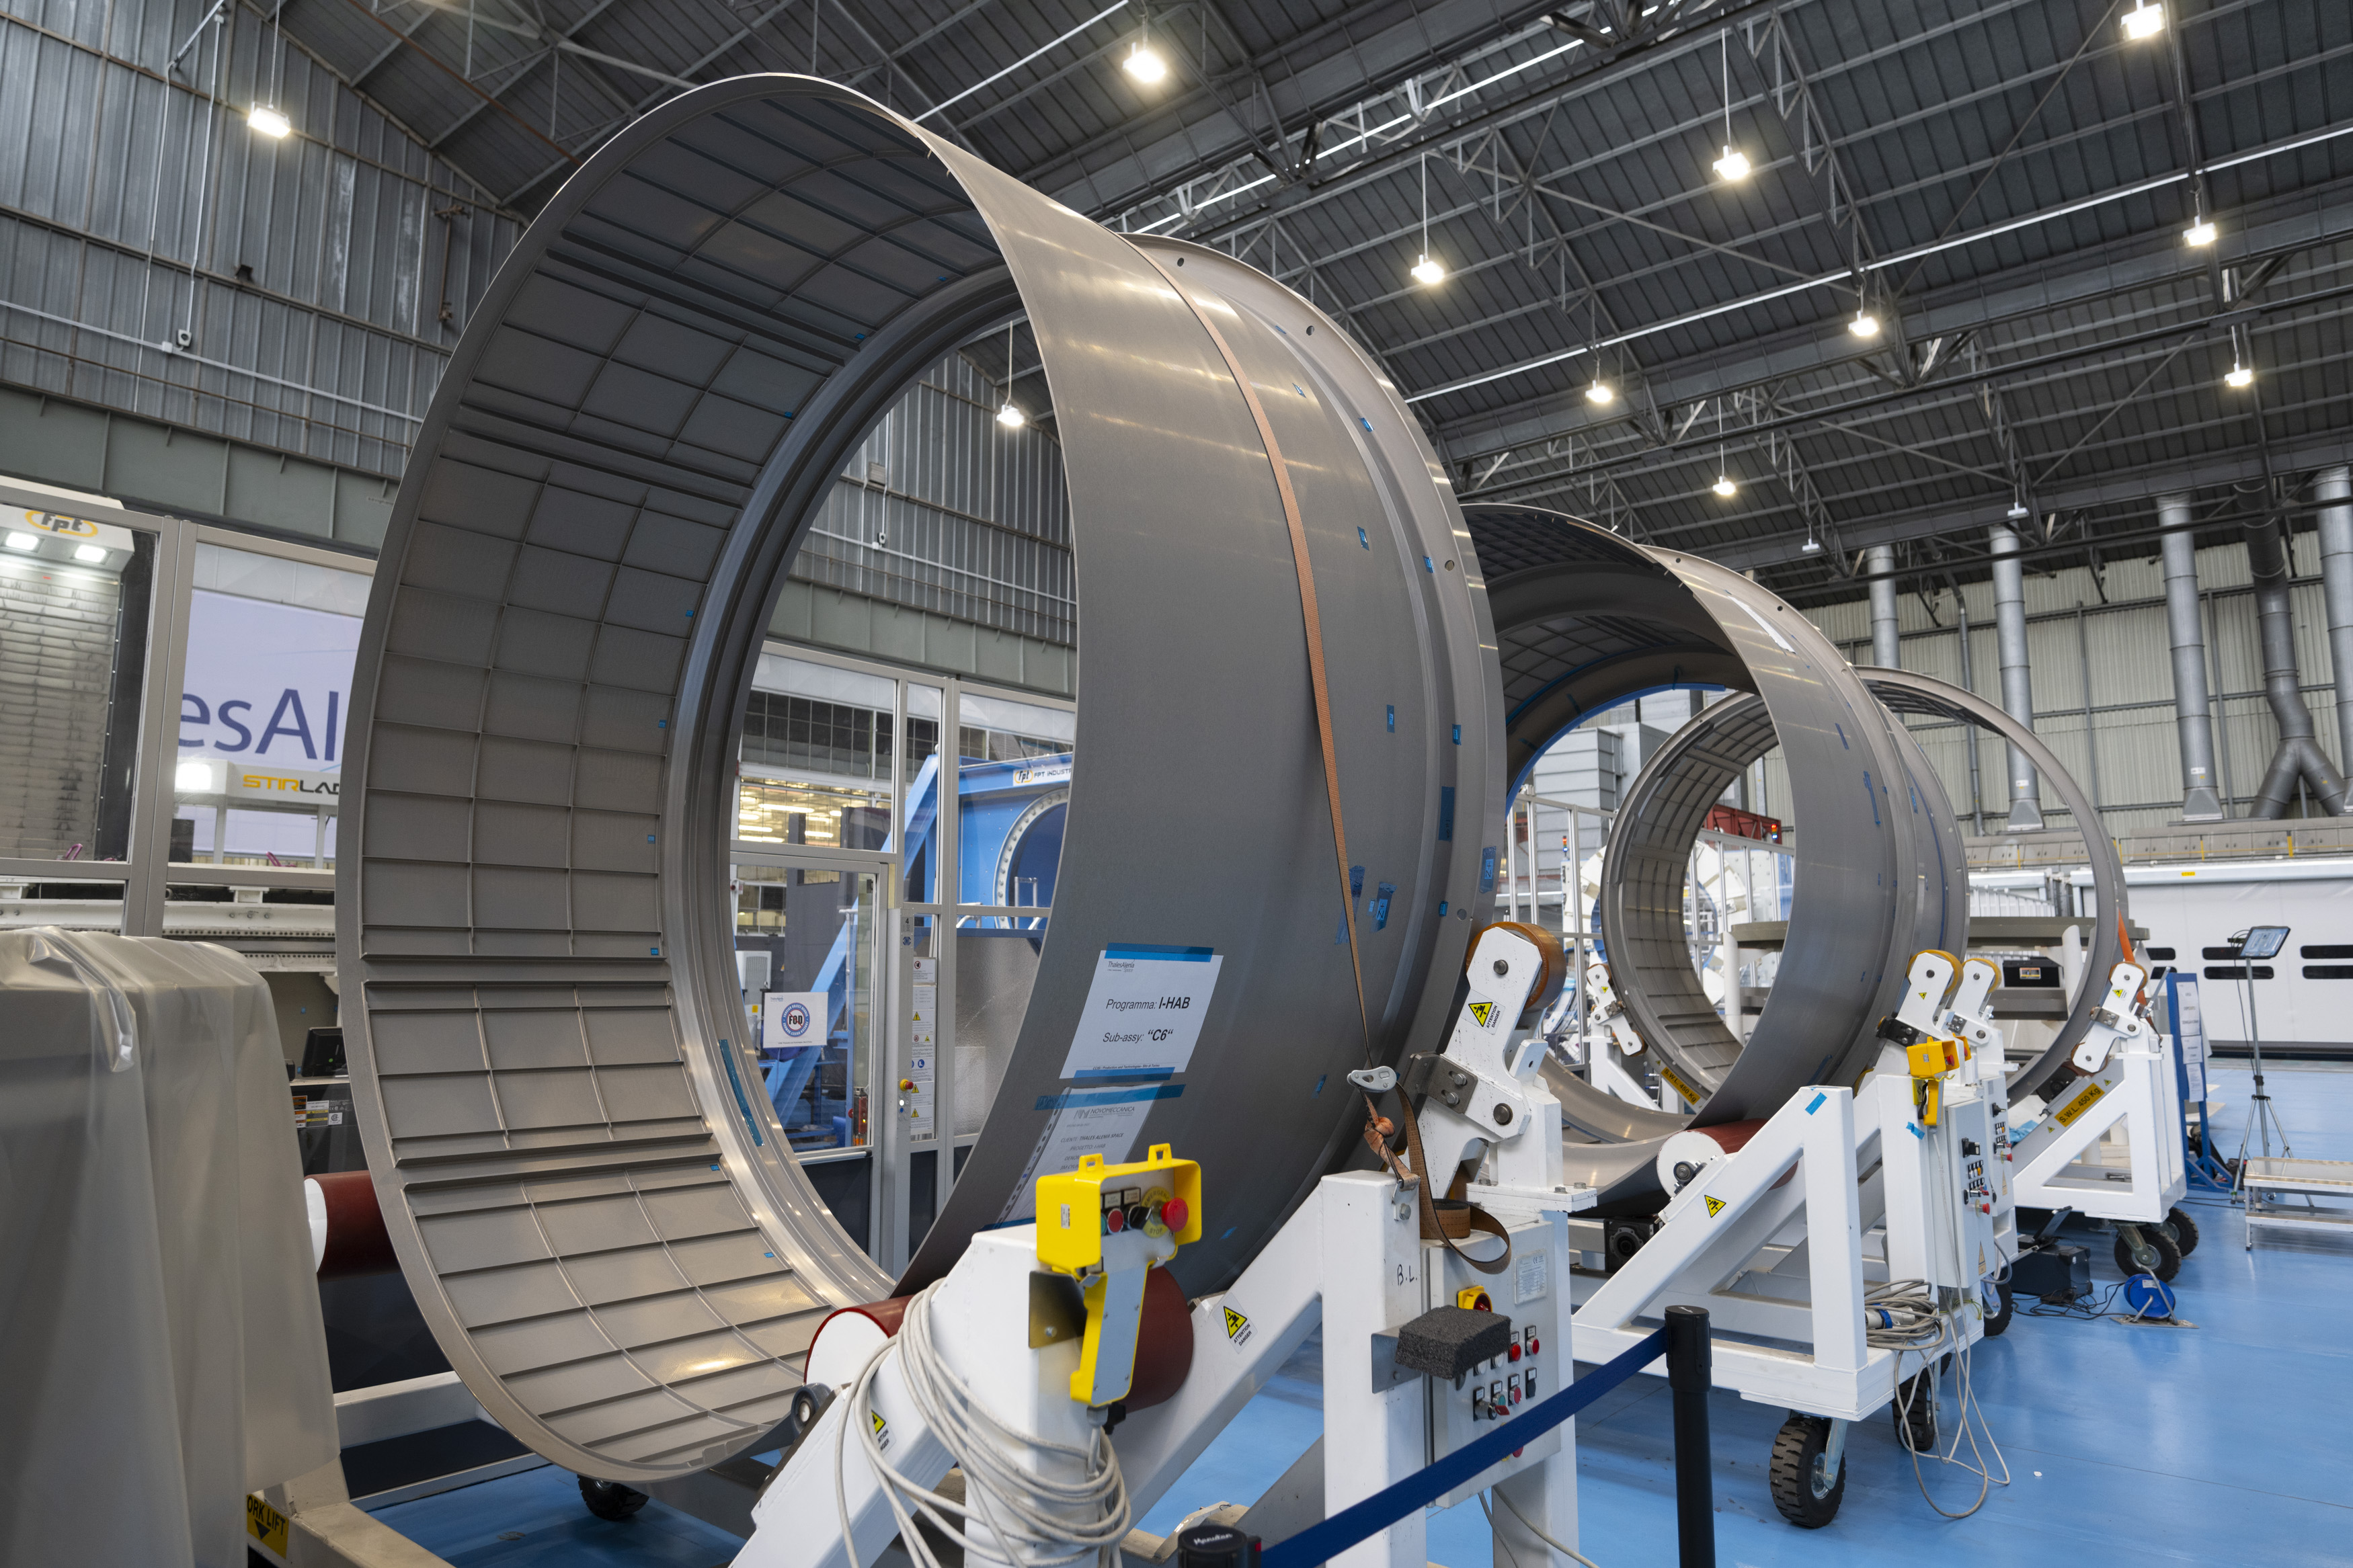 Industrial facility with large cylindrical metallic rings supported by frameworks, equipped with electronic control units.